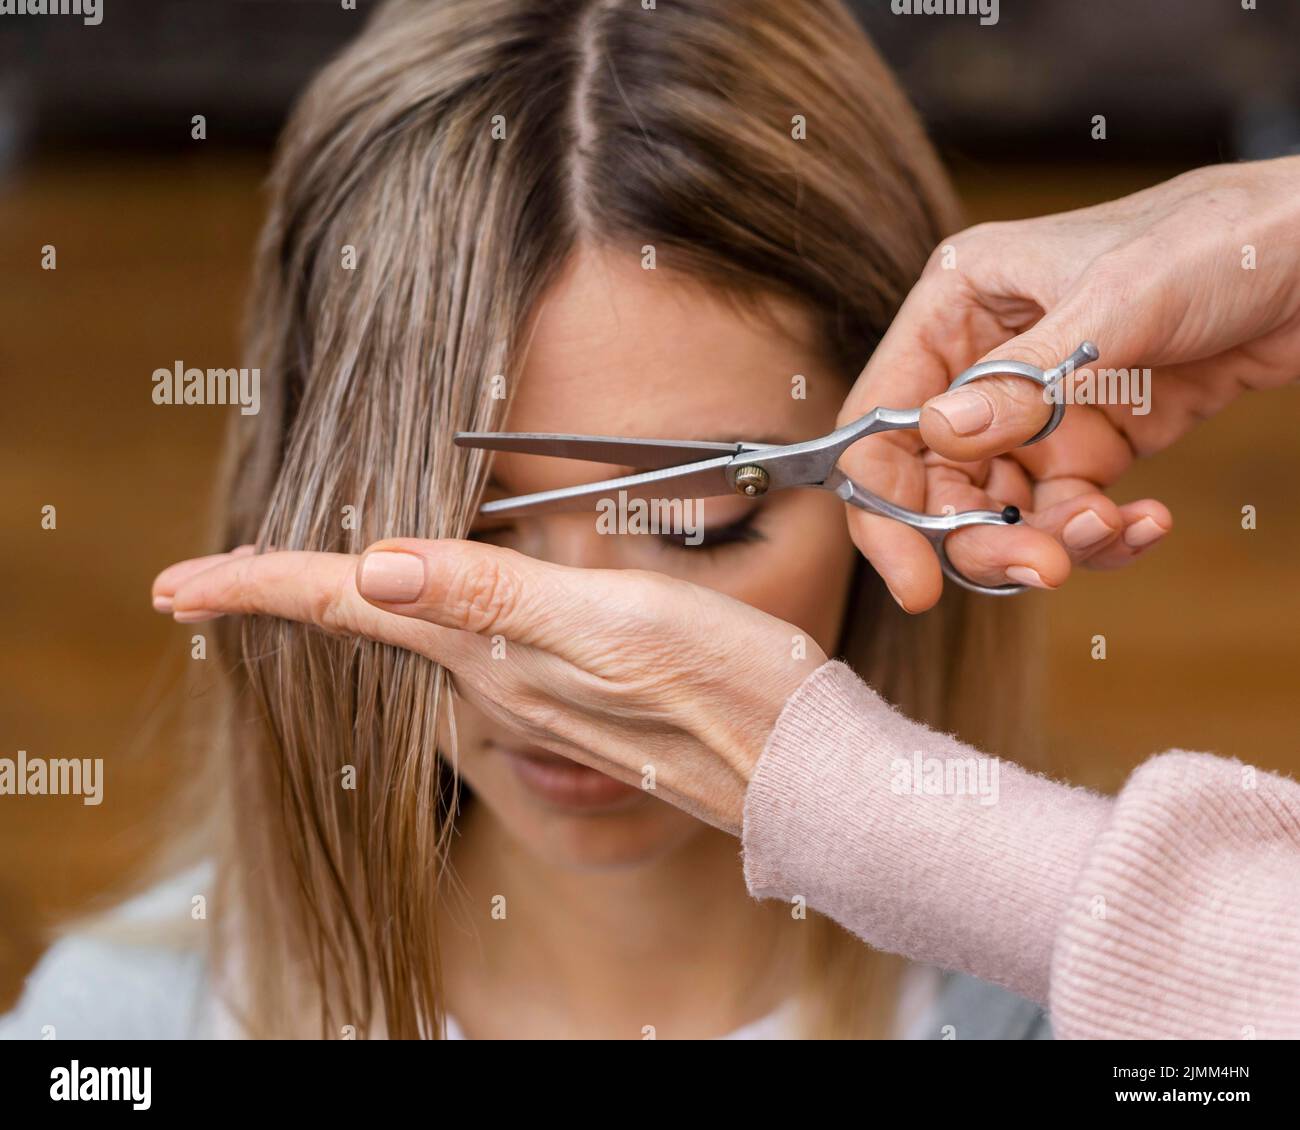 Front view woman getting haircut Stock Photo